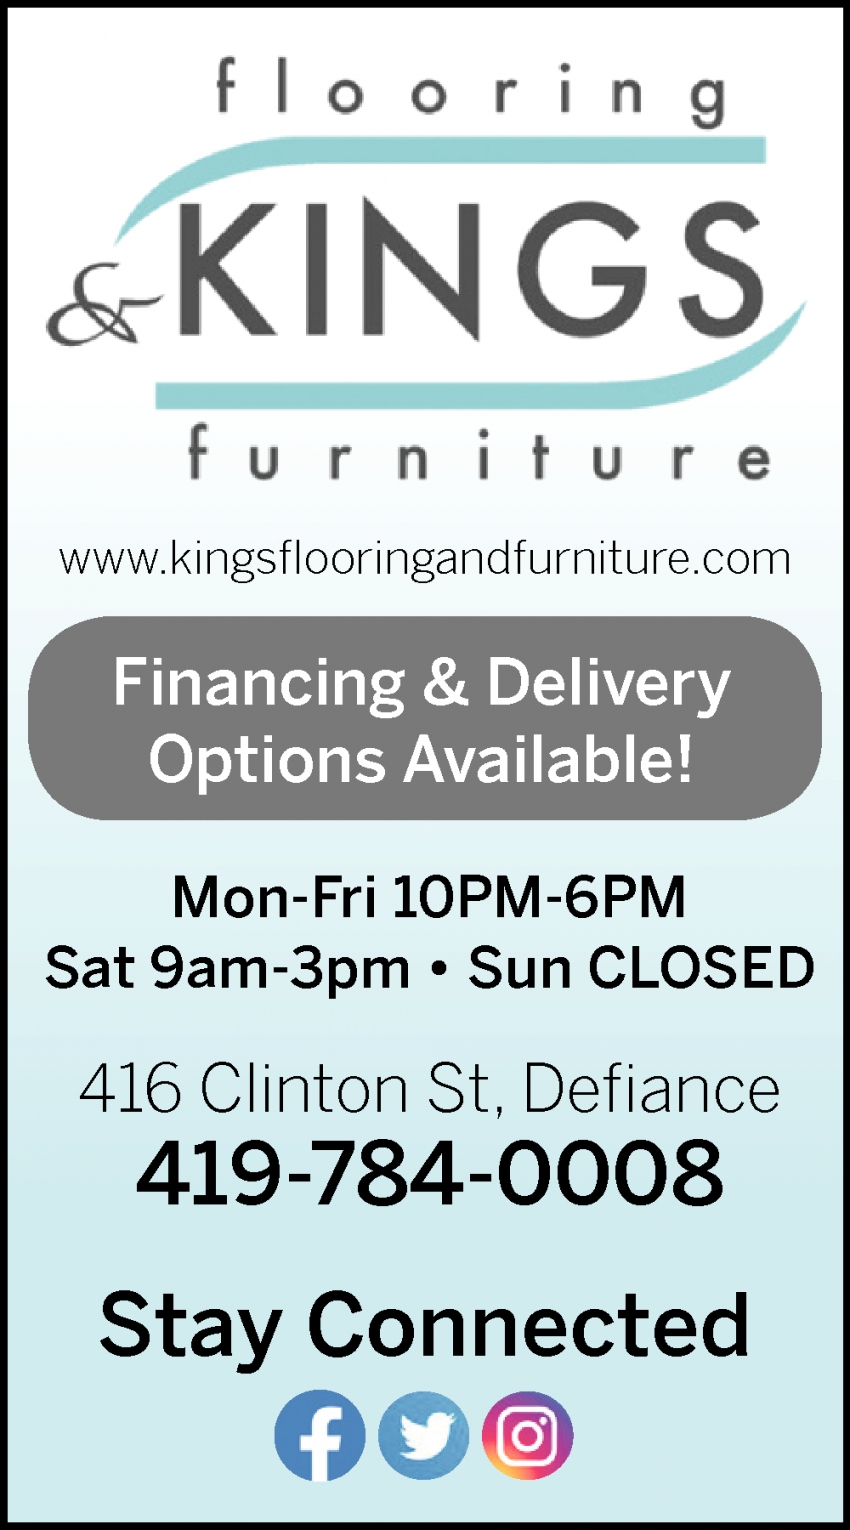 Financing & Delivery Options Available!